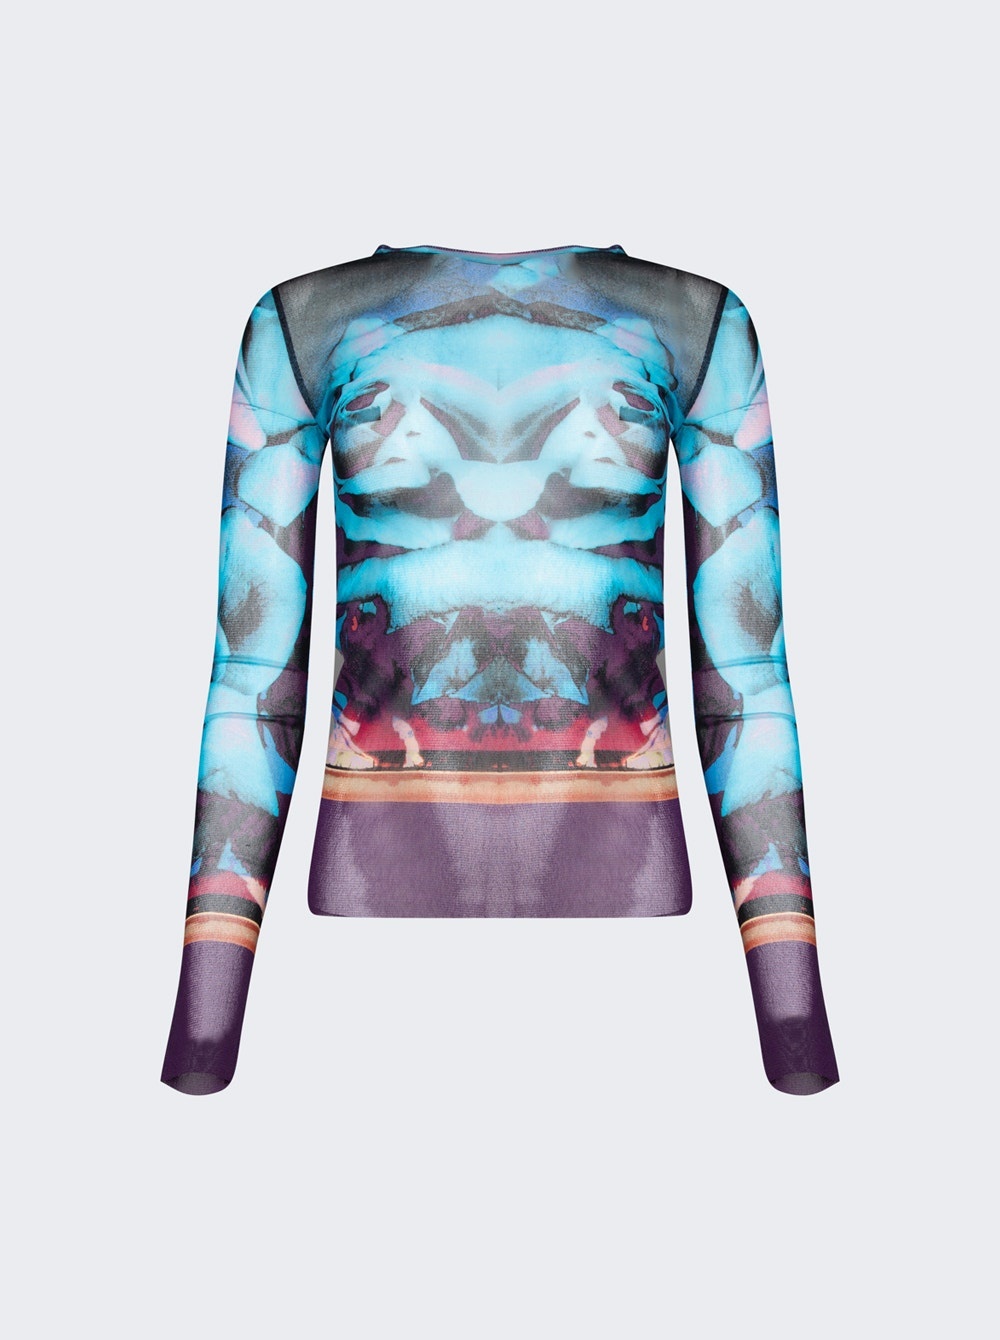 TrÈs Gaultier #1 Rose Printed Mesh Long Sleeve Top Blue And Purple - 1